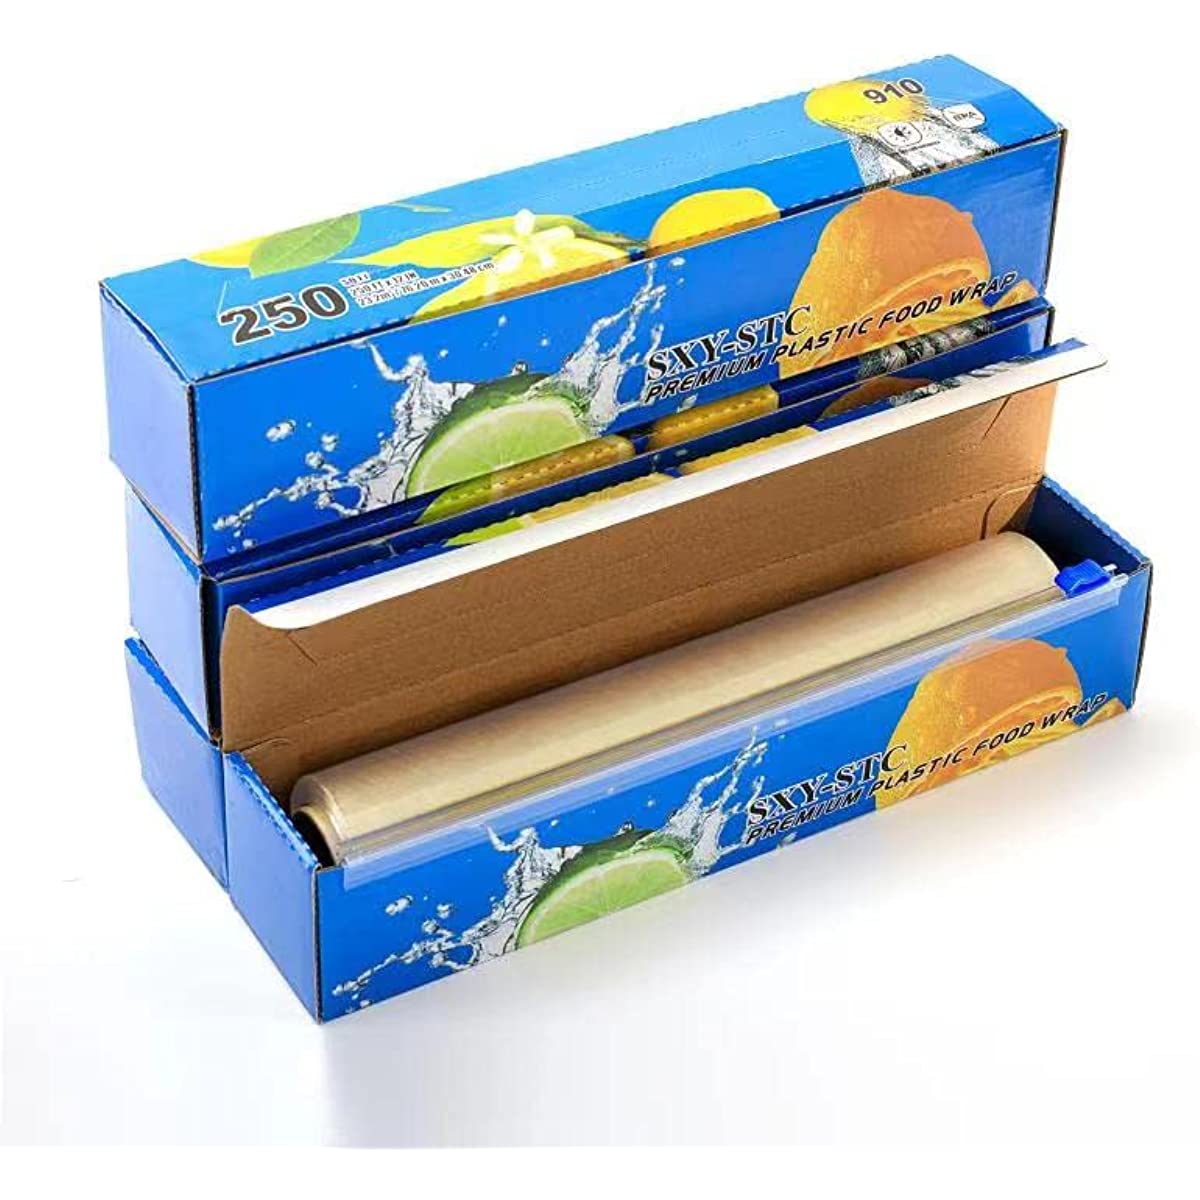 PLASTIC FOOD WRAP 12“Wide with slide cutter 250 squqre fooot 4 box